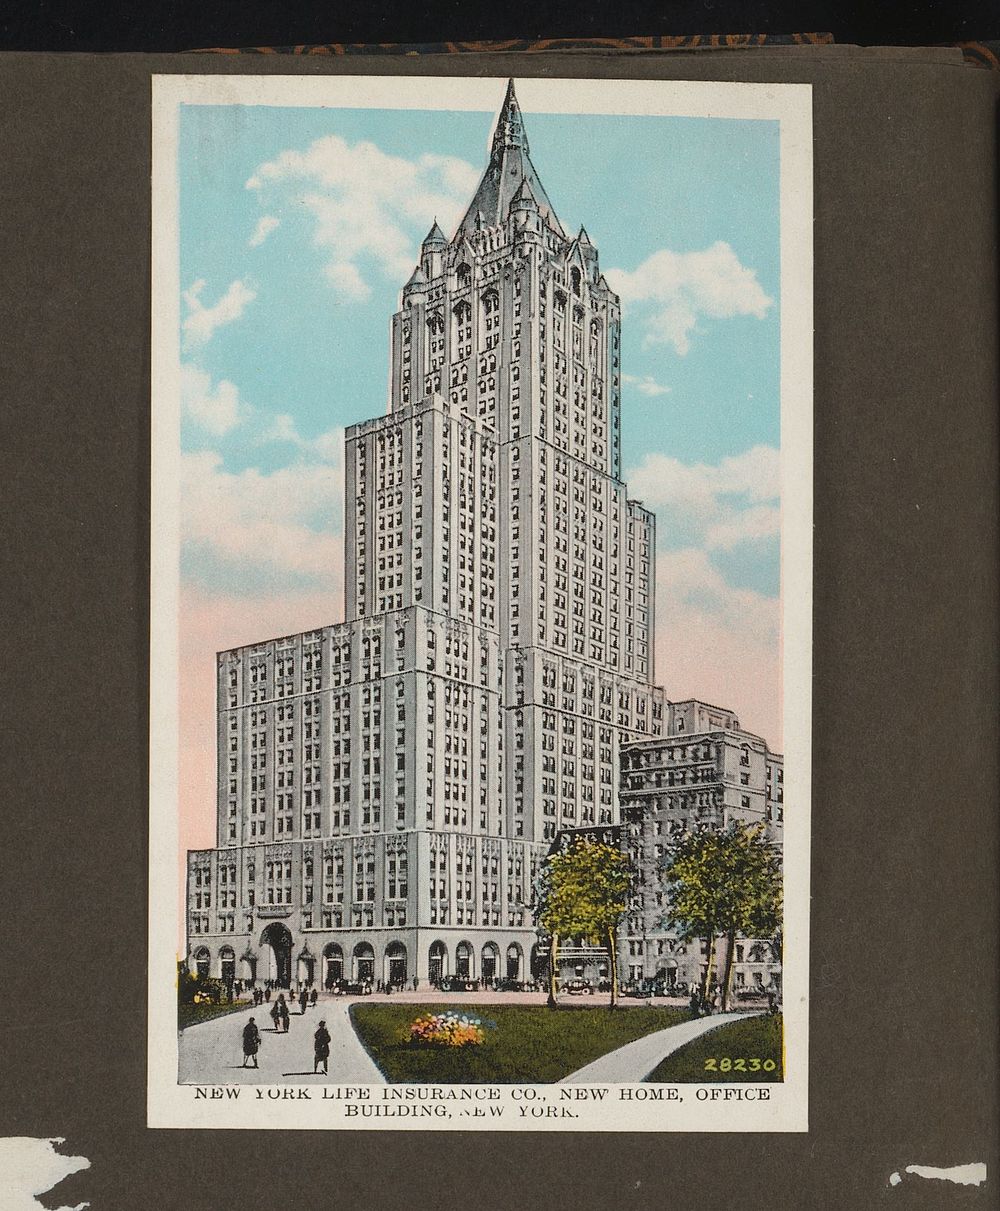 New York life insurance co. New Home, Office building, New York (c. 1928) by anonymous